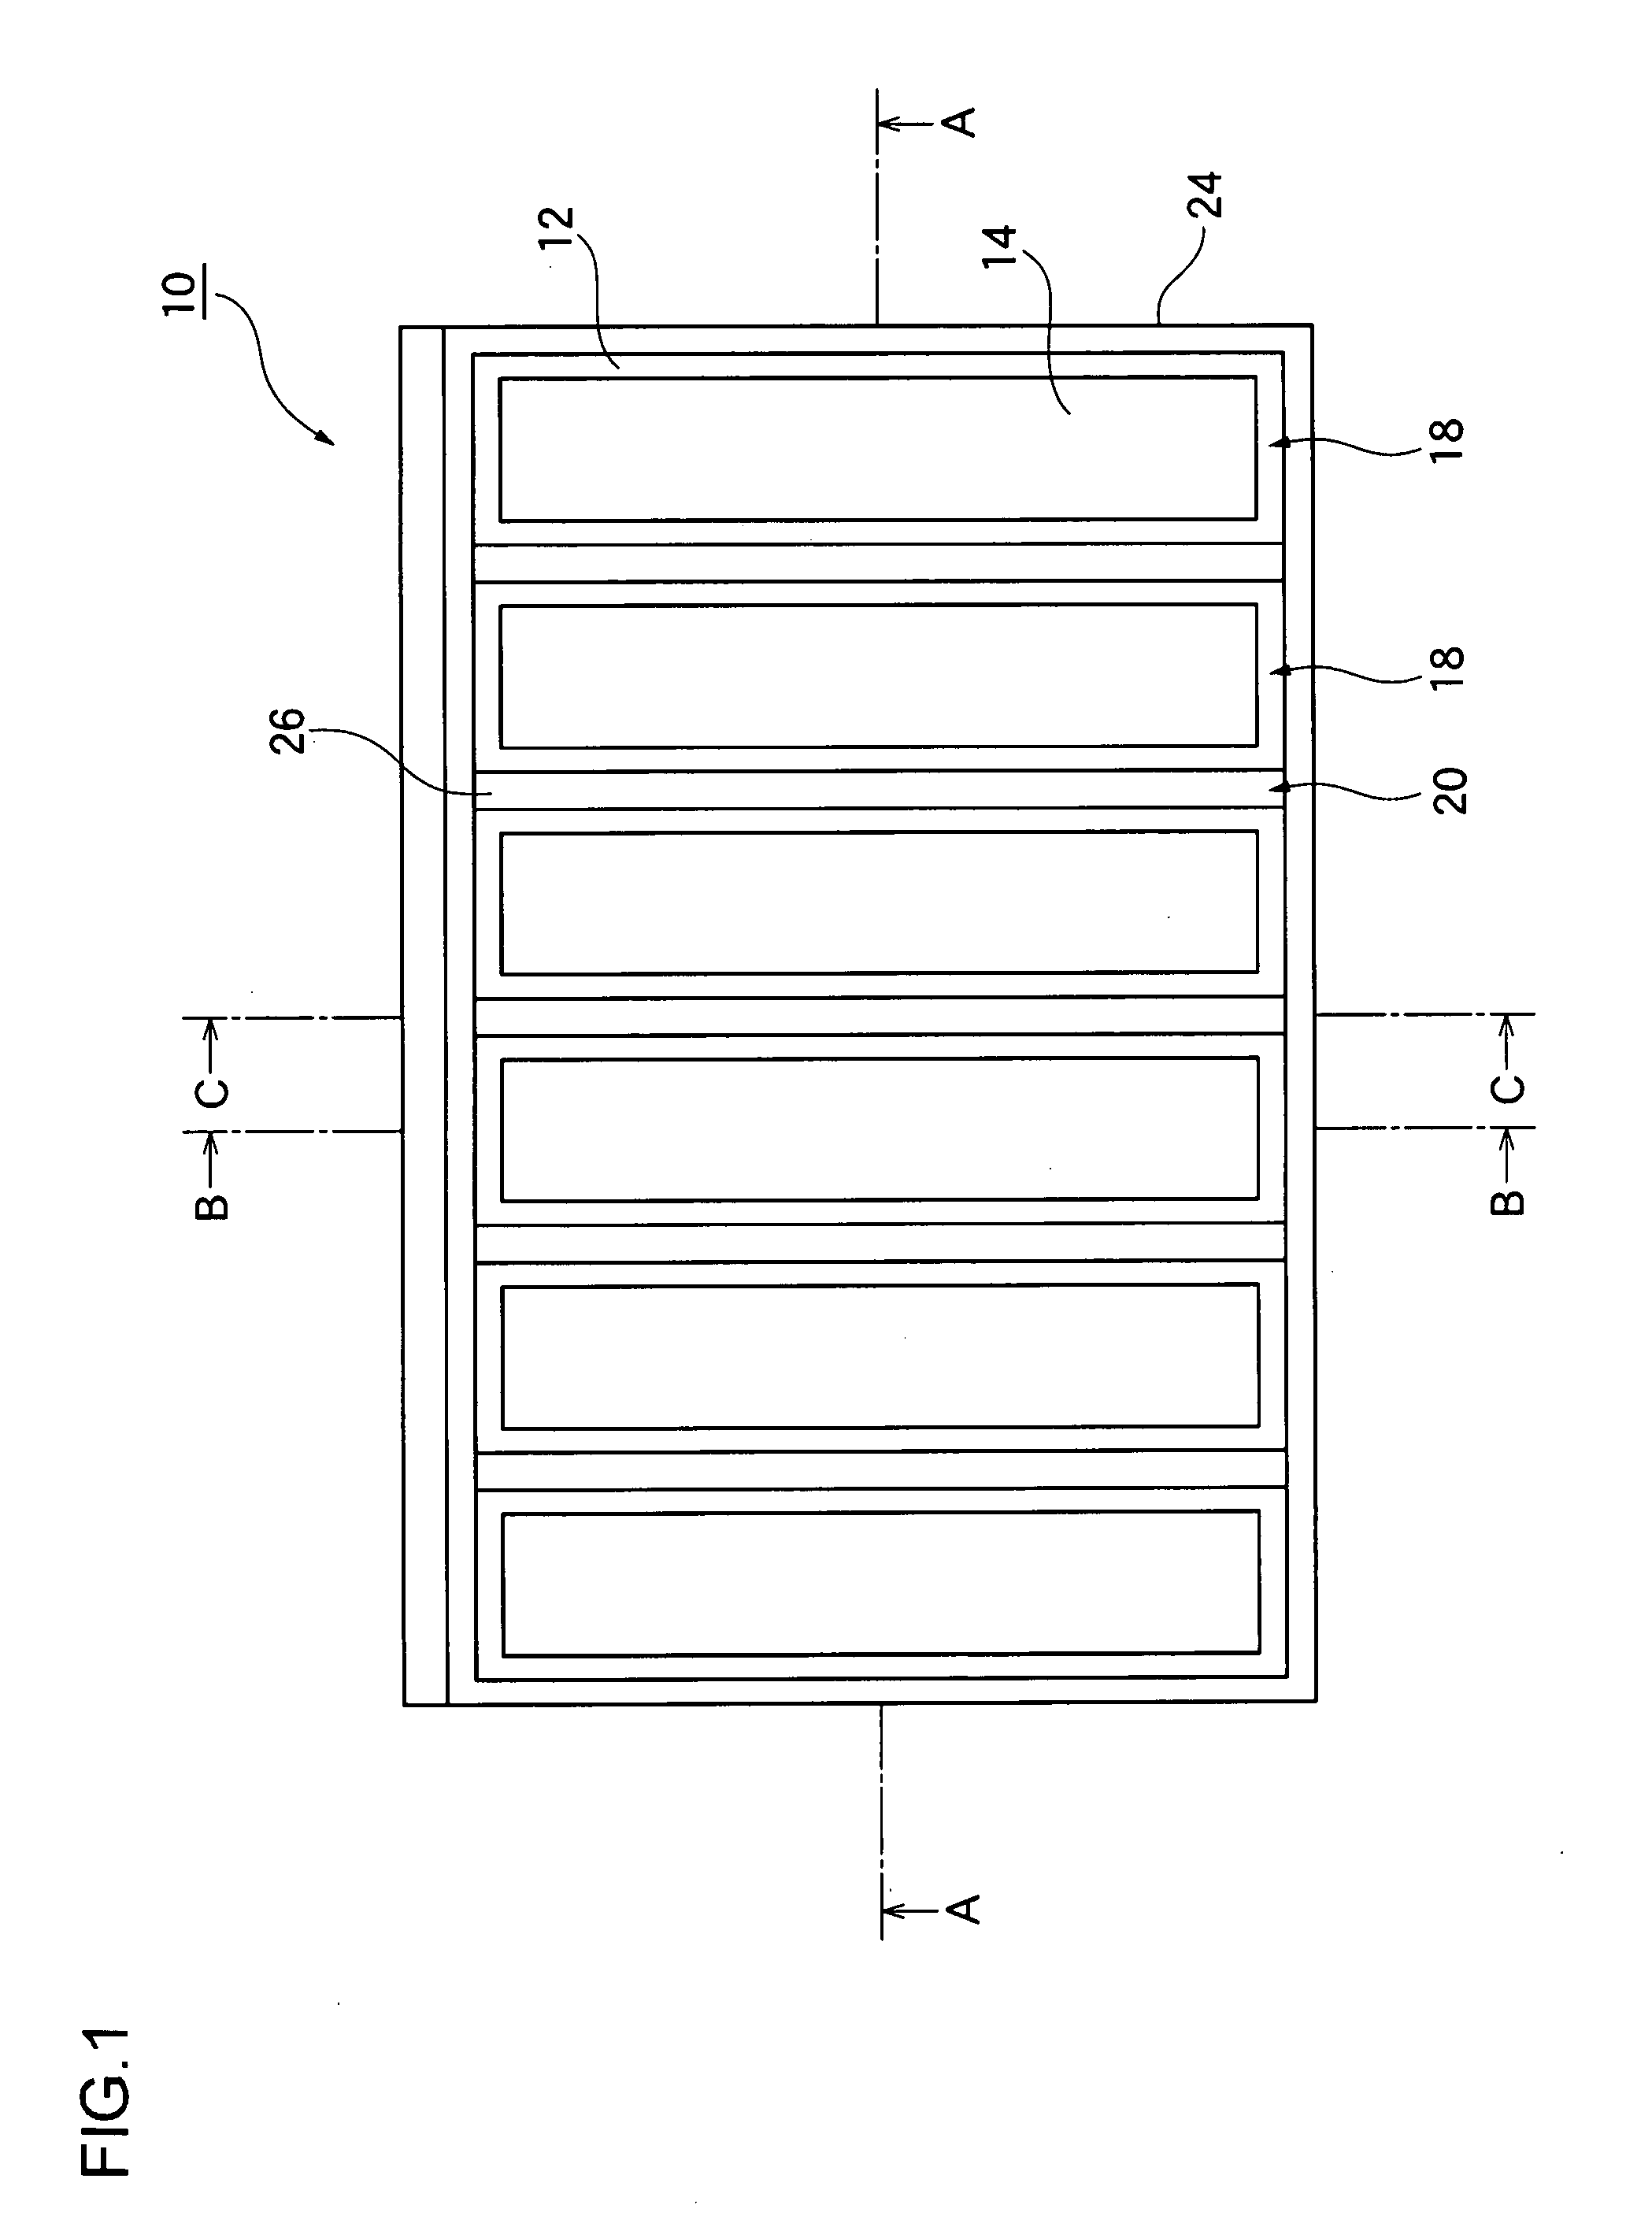 Fuel cell module with a water reservoir including a water storing portion expanding from a cell unit to an anode side